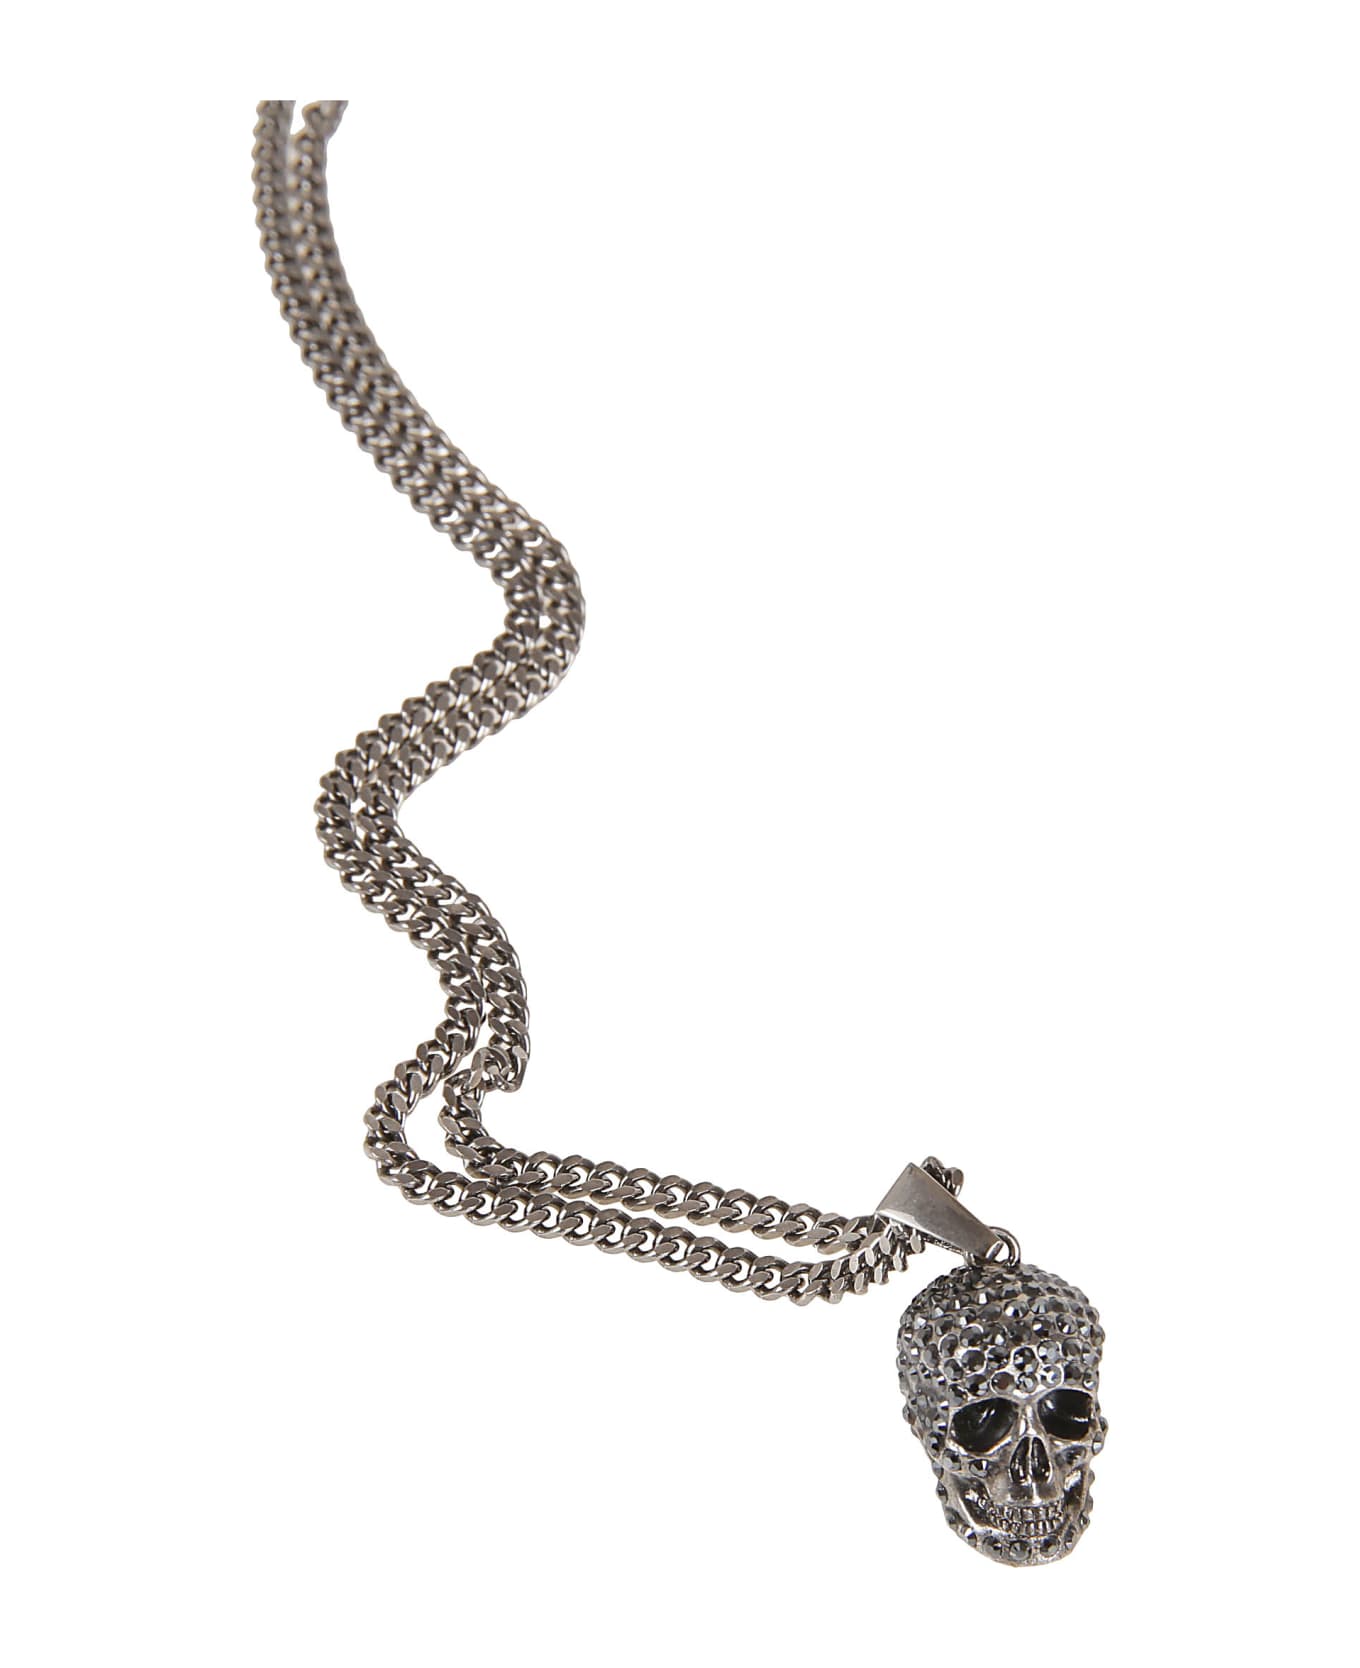 Alexander McQueen Pave` Skull Necklace - Silver ネックレス